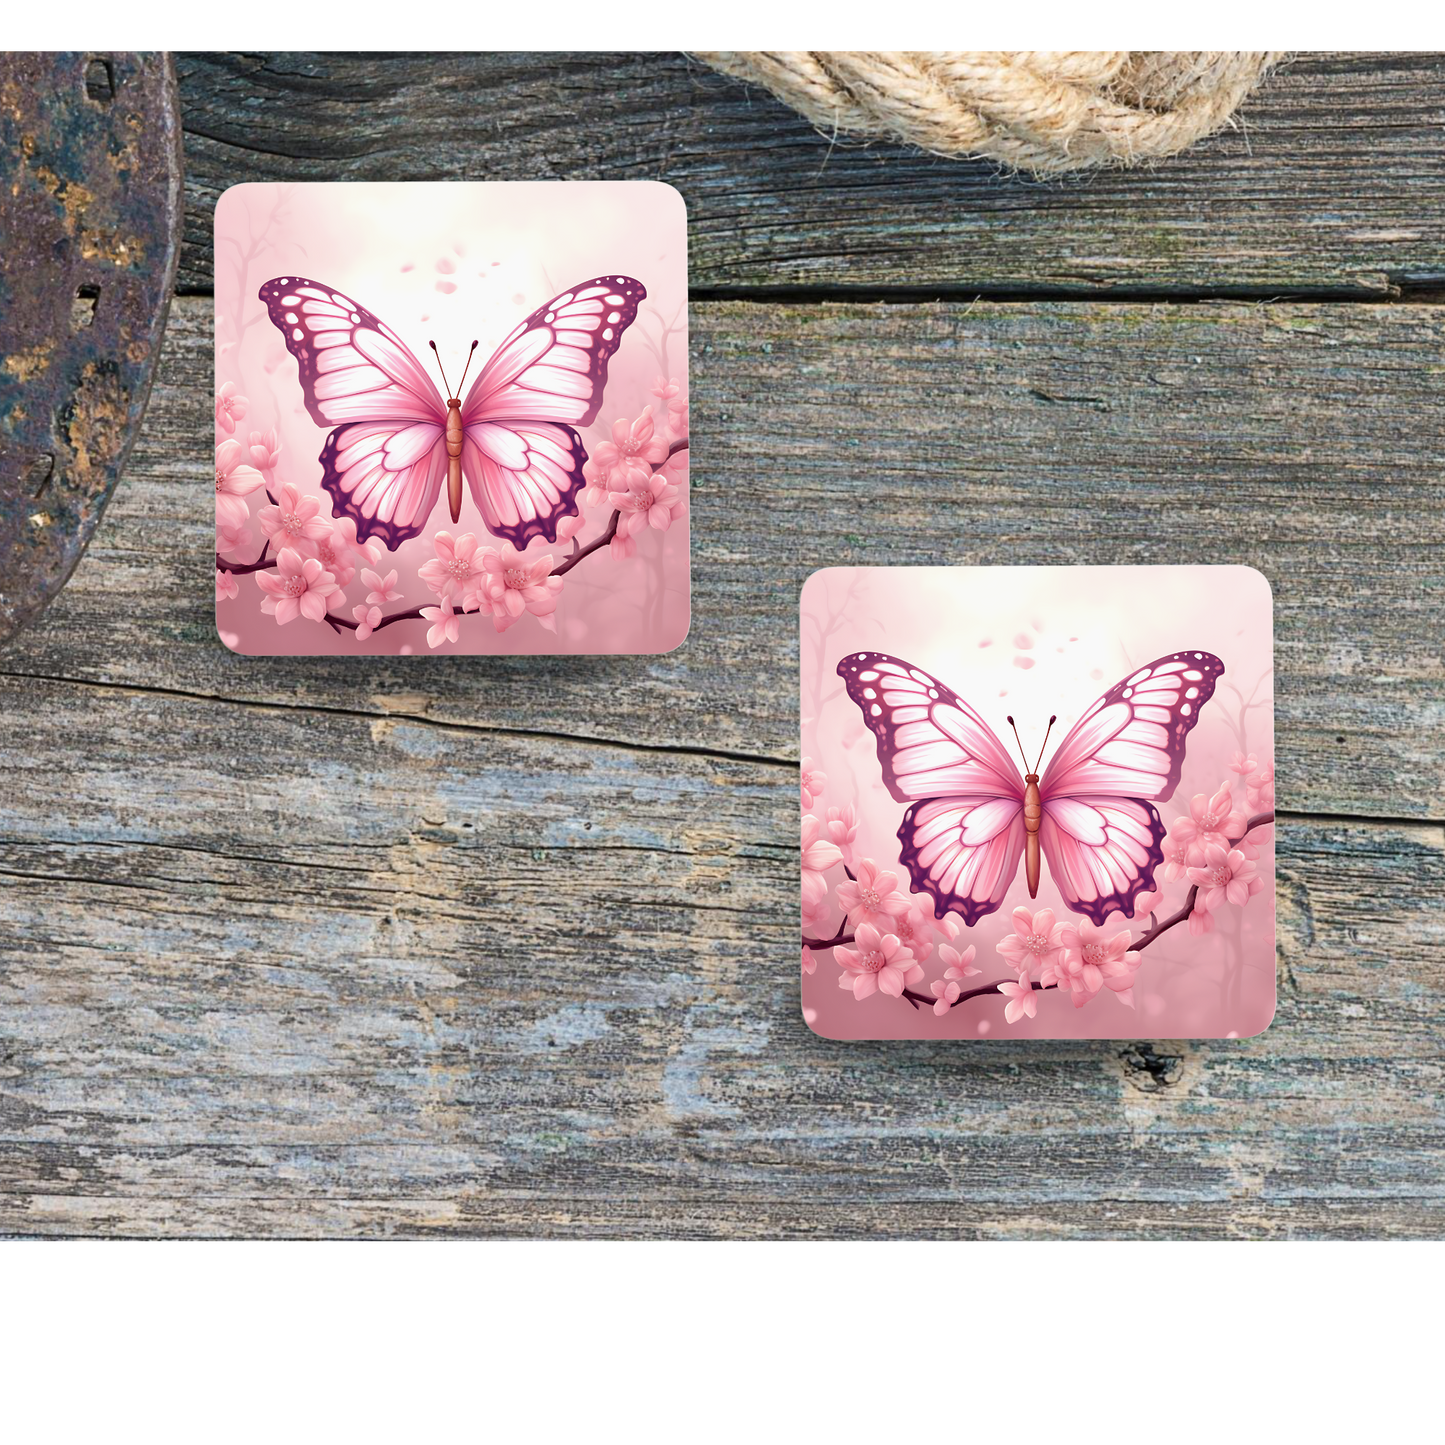 Beautifully Printed  Pink Butterfly Wooden Coasters for Stylish Home Décor, desk accessories, dining room